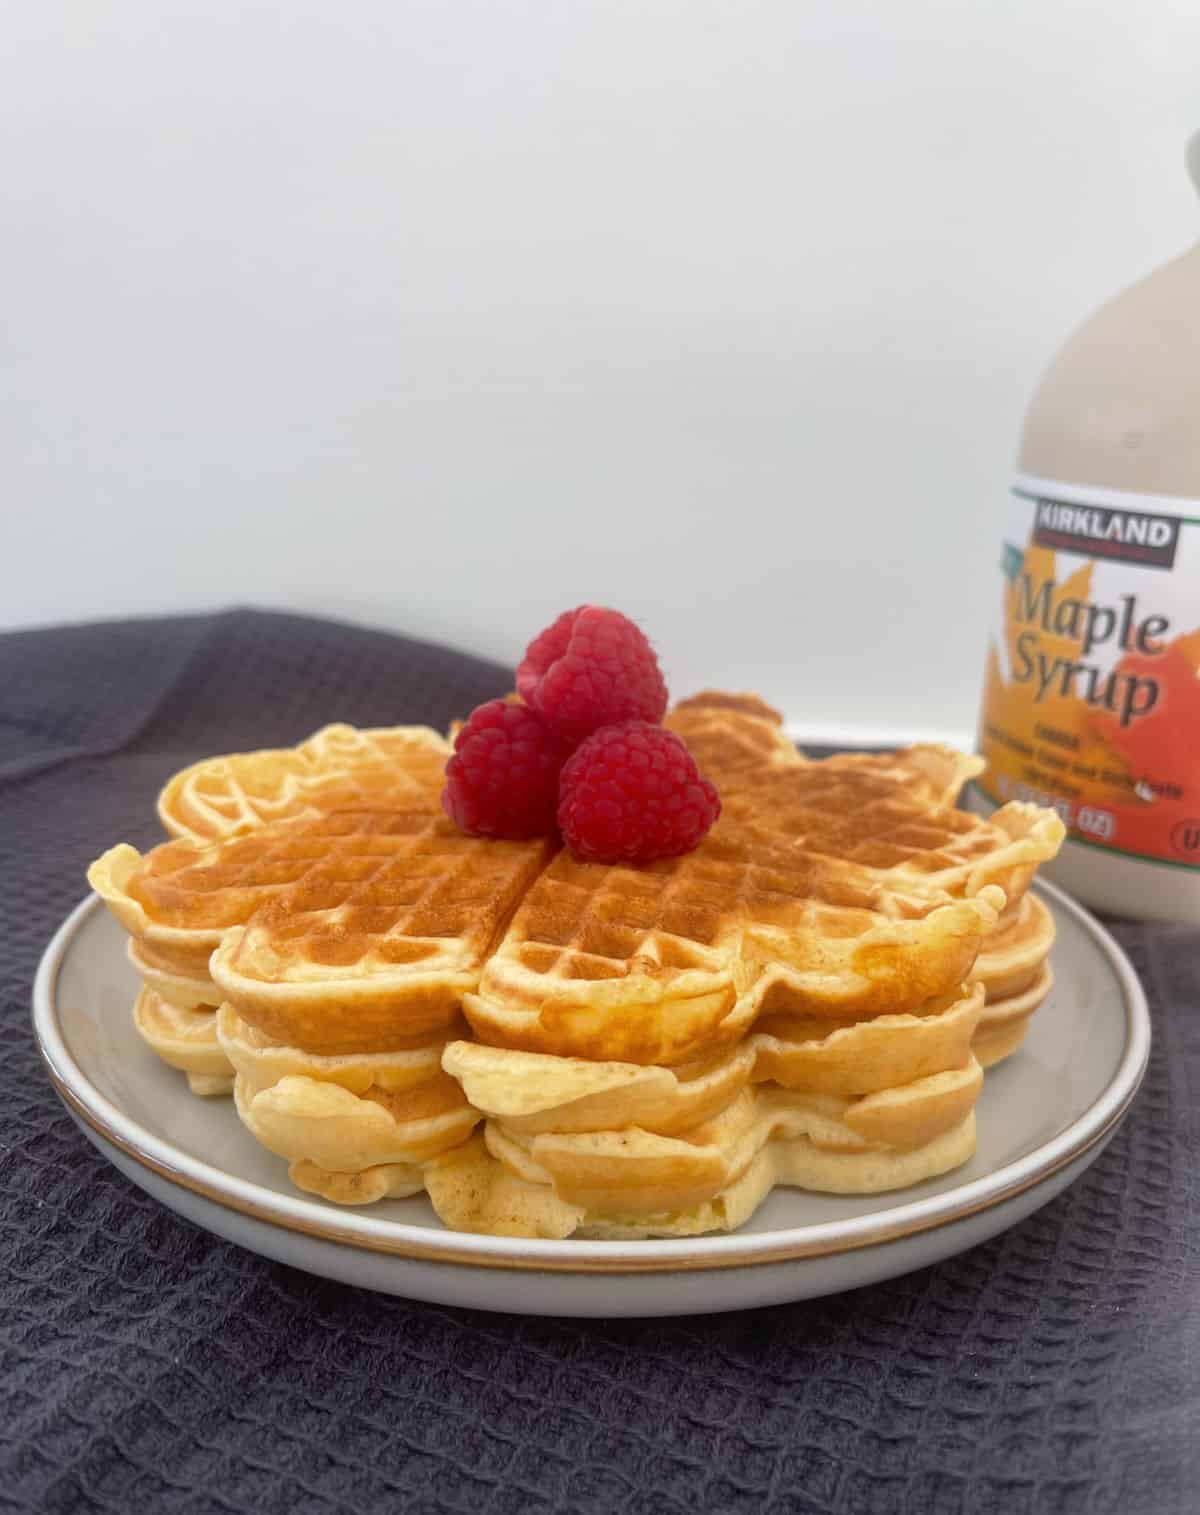 A stack of waffles topped with raspberries and maple syrup in the background on a grey plate.